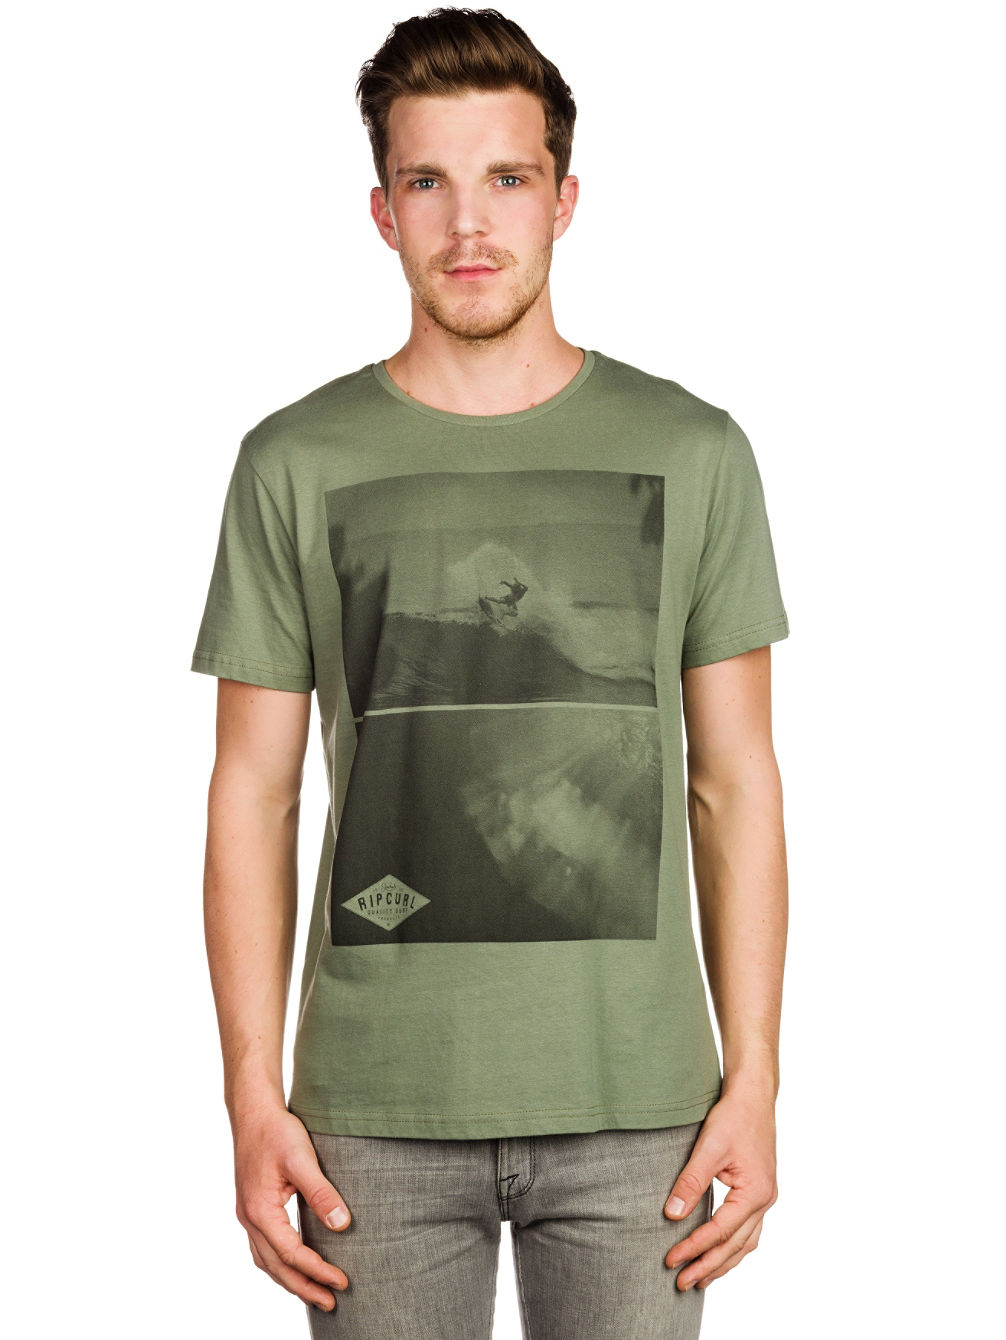 Buy Rip Curl Shred T-Shirt online at blue-tomato.com